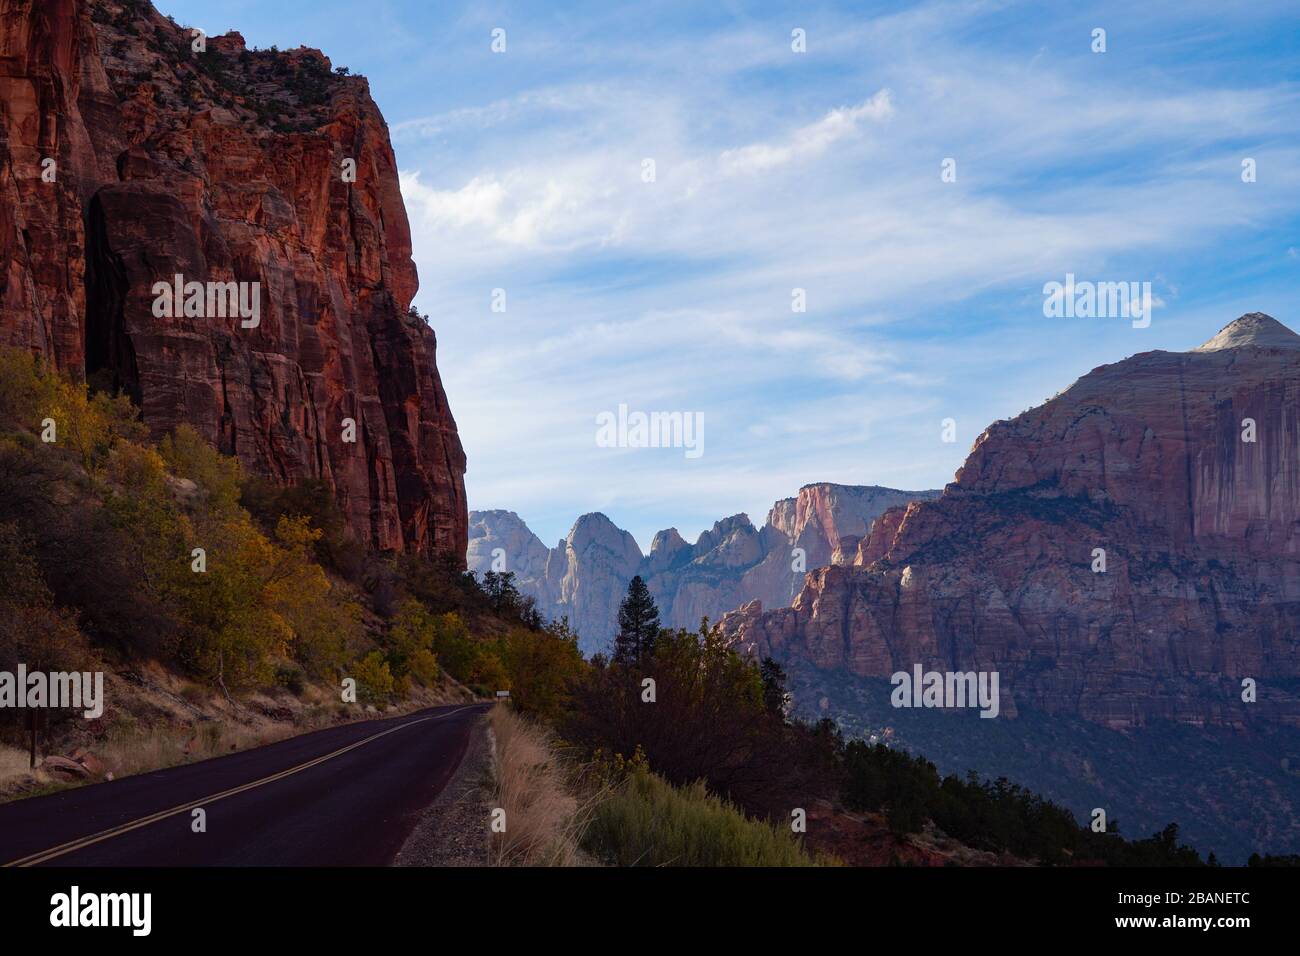 A two lane road hugs the towering red rock cliff on the way up to Zion's tunnel. Stock Photo